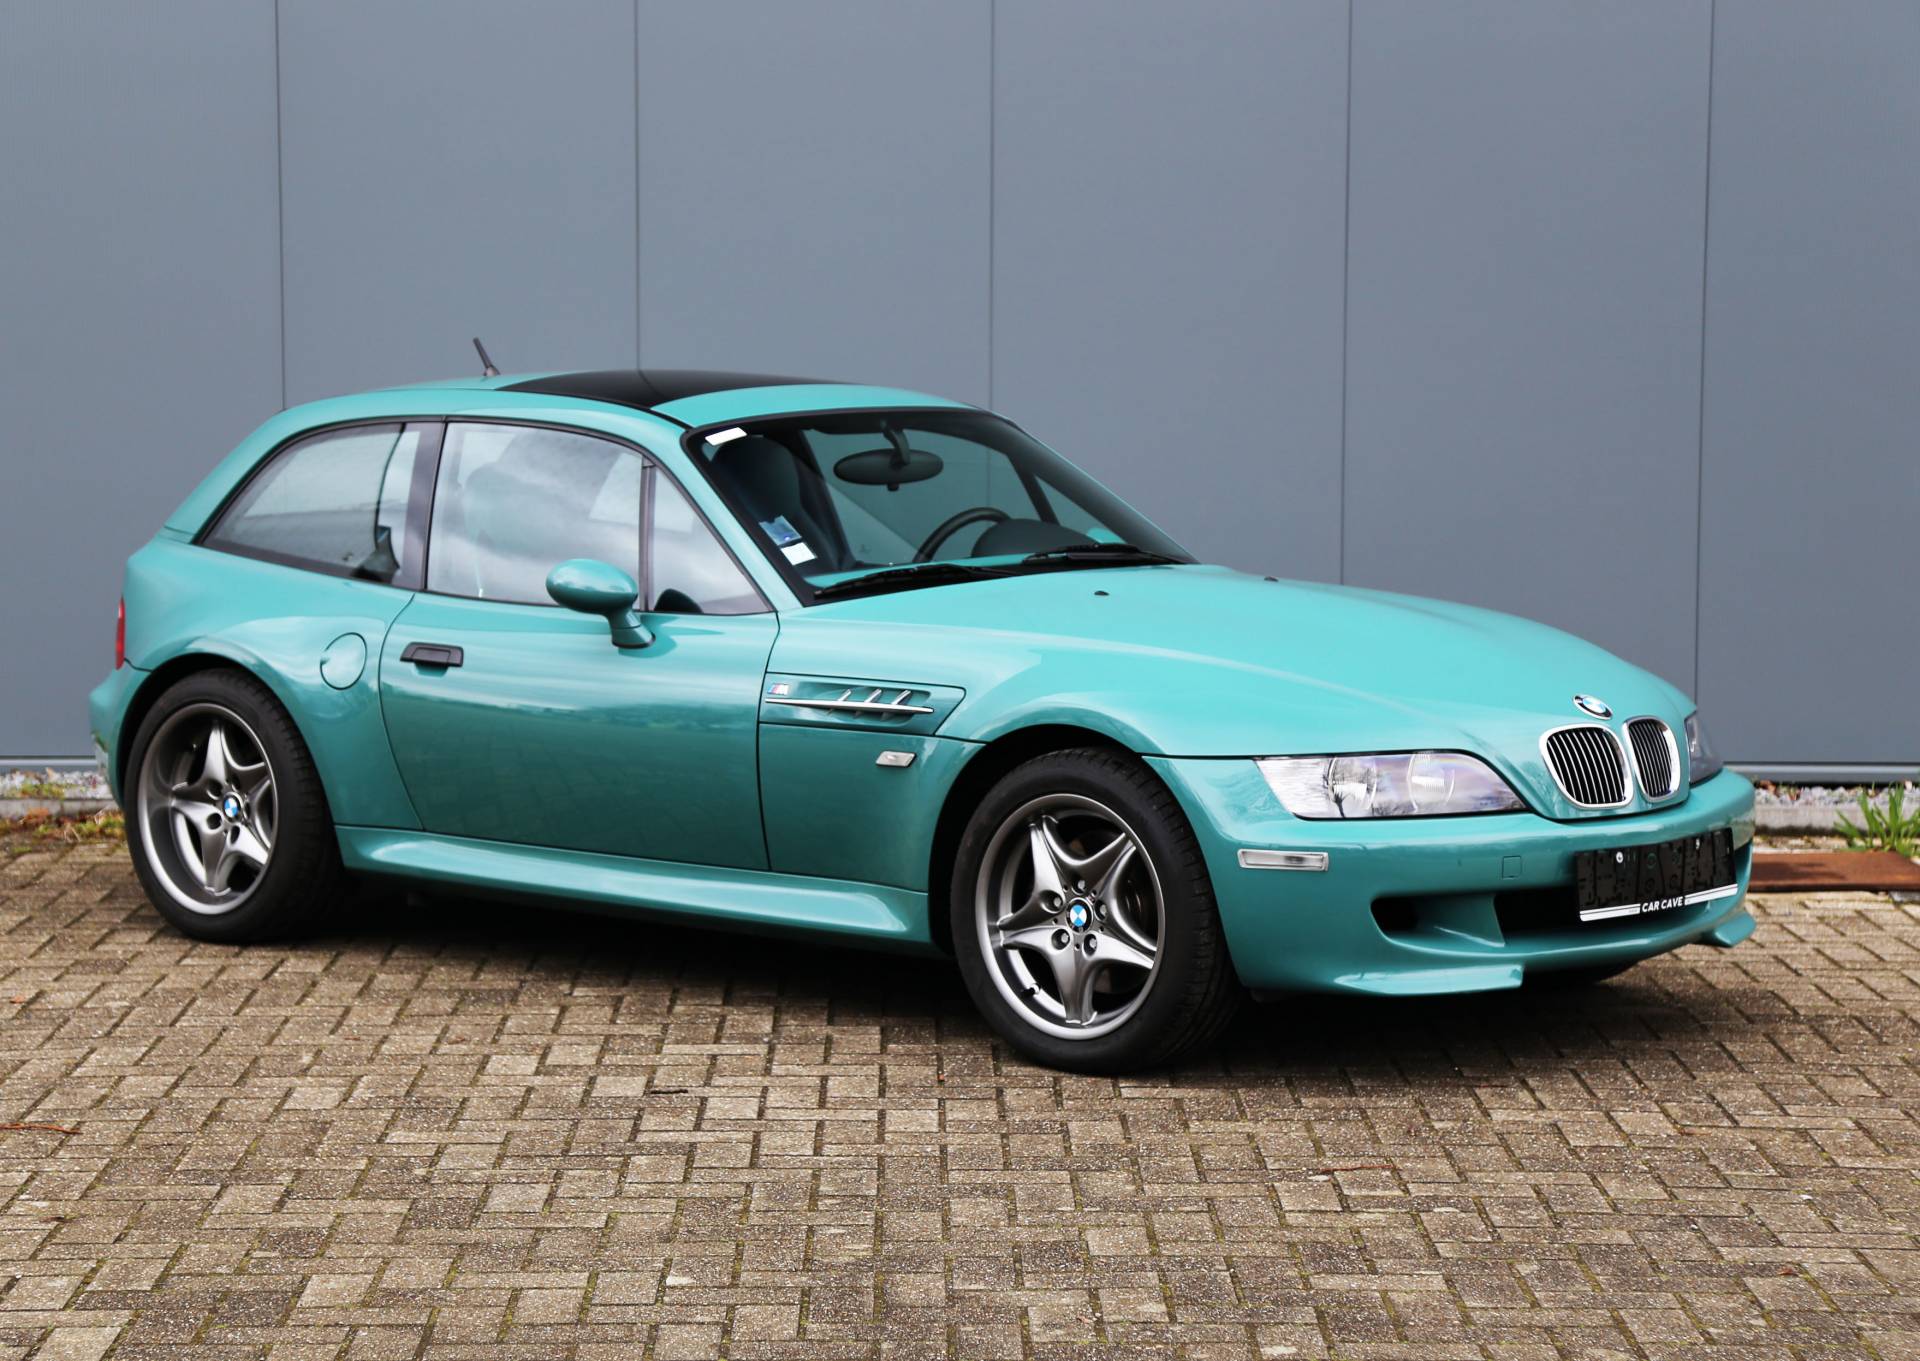 For Sale Bmw Z3 M Coupe 1999 Offered For Gbp 45 614